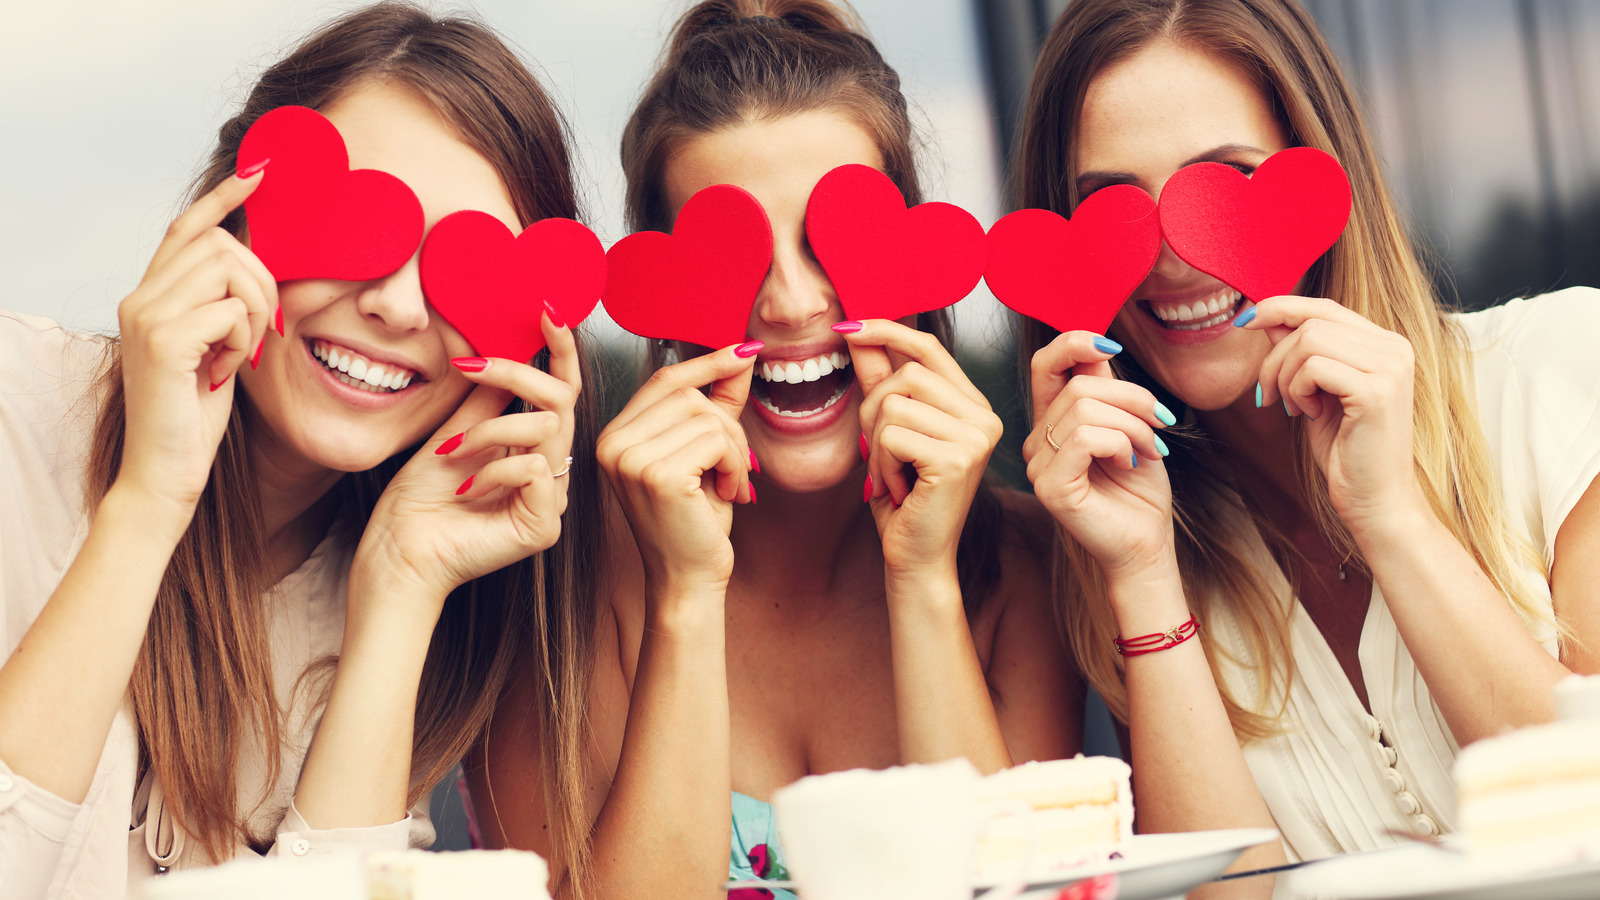 Galentine's Day The Origins, The Purpose, And Some Great Ways To Celebrate